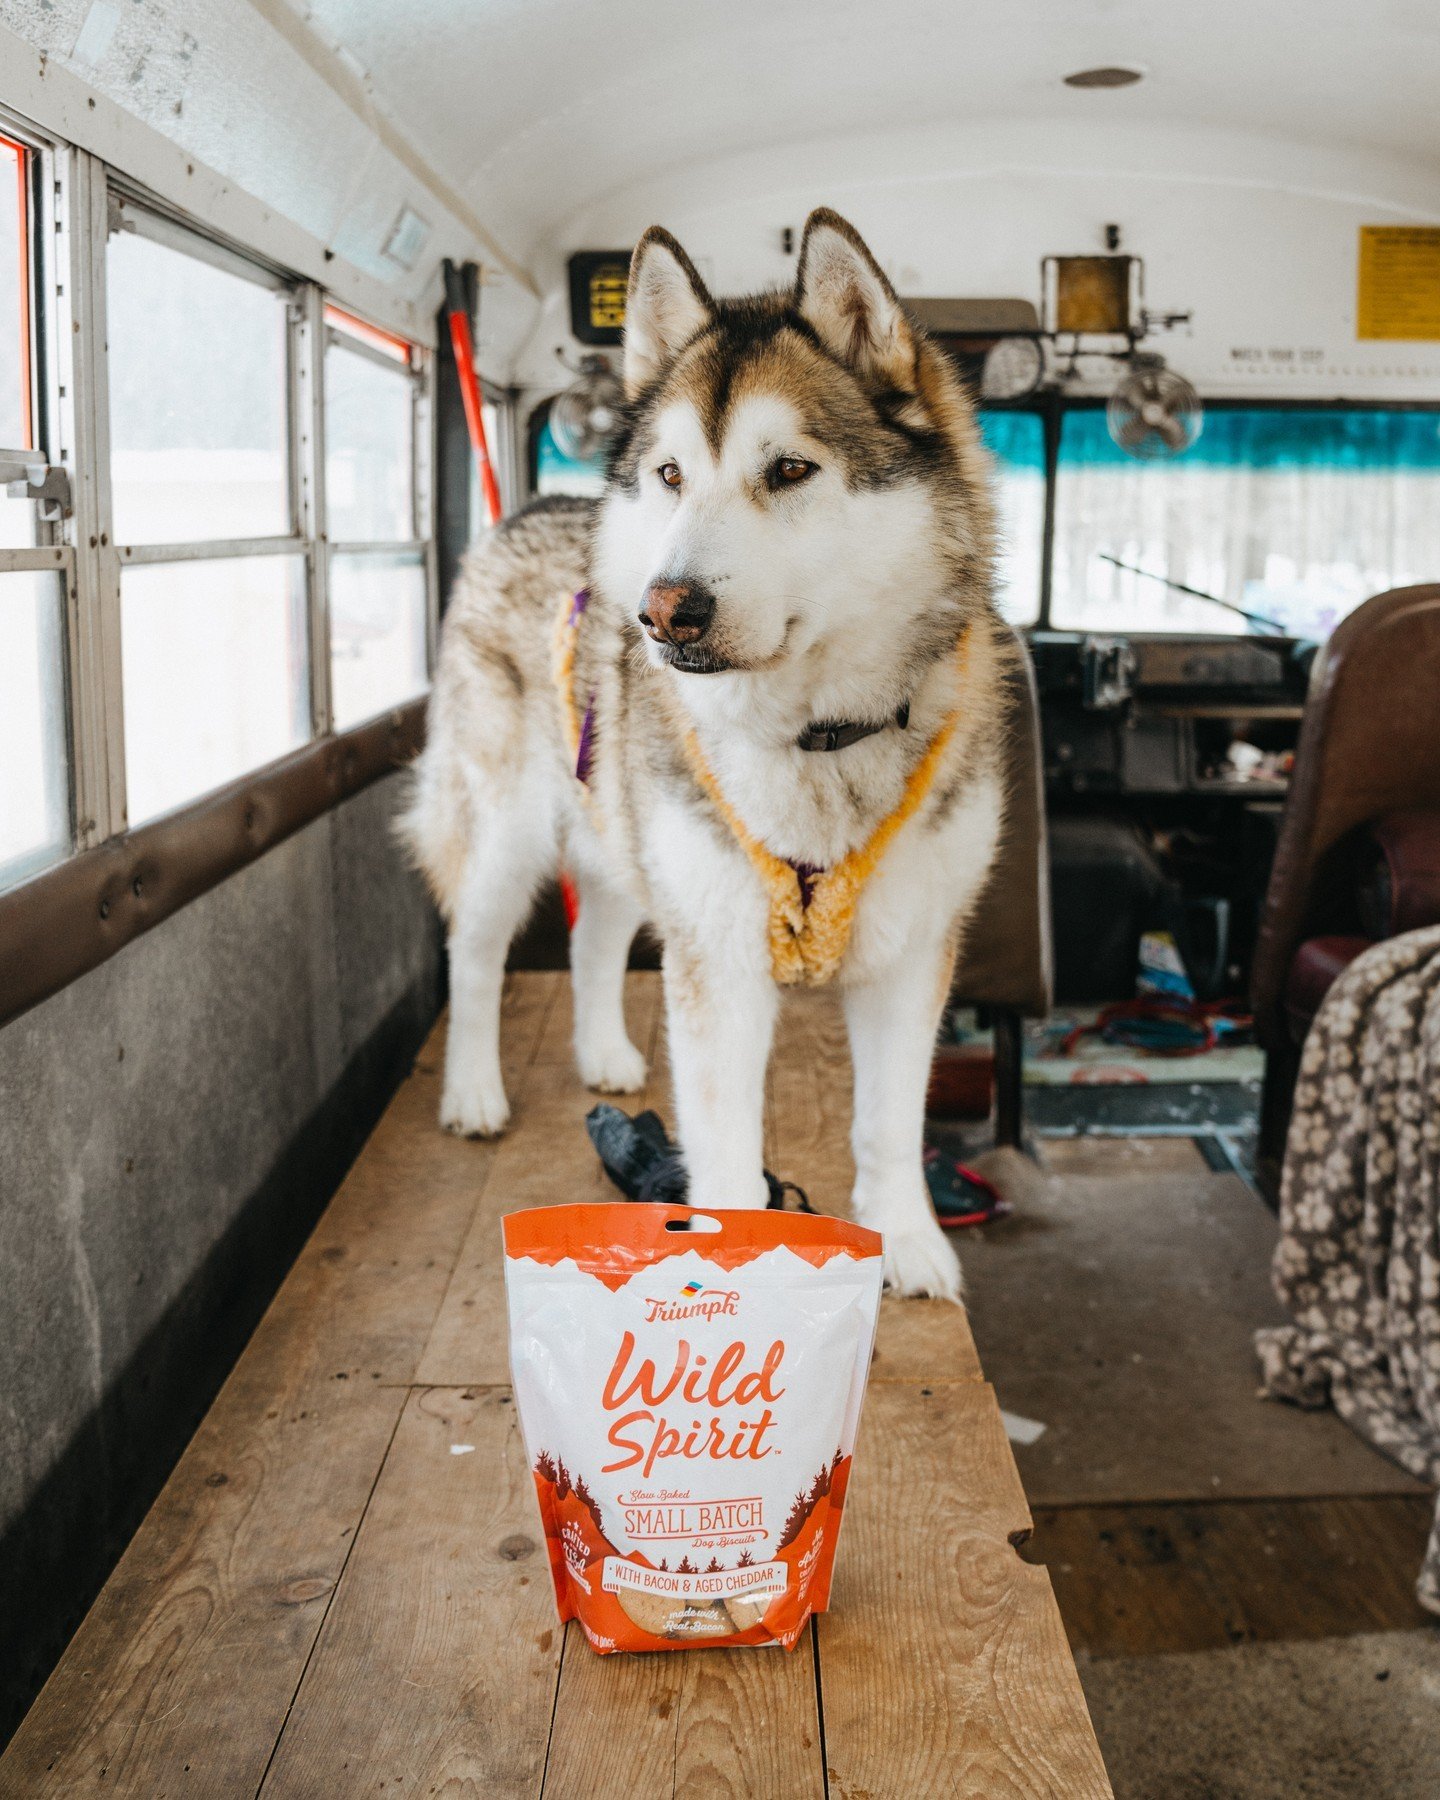 Happy National Biscuit Day! 🍪 Make sure to celebrate by giving your favorite four-legged companion one of our delicious slow-baked biscuits 🐾 

#TriumphTogether #TriumphPack #NationalBiscuitDay